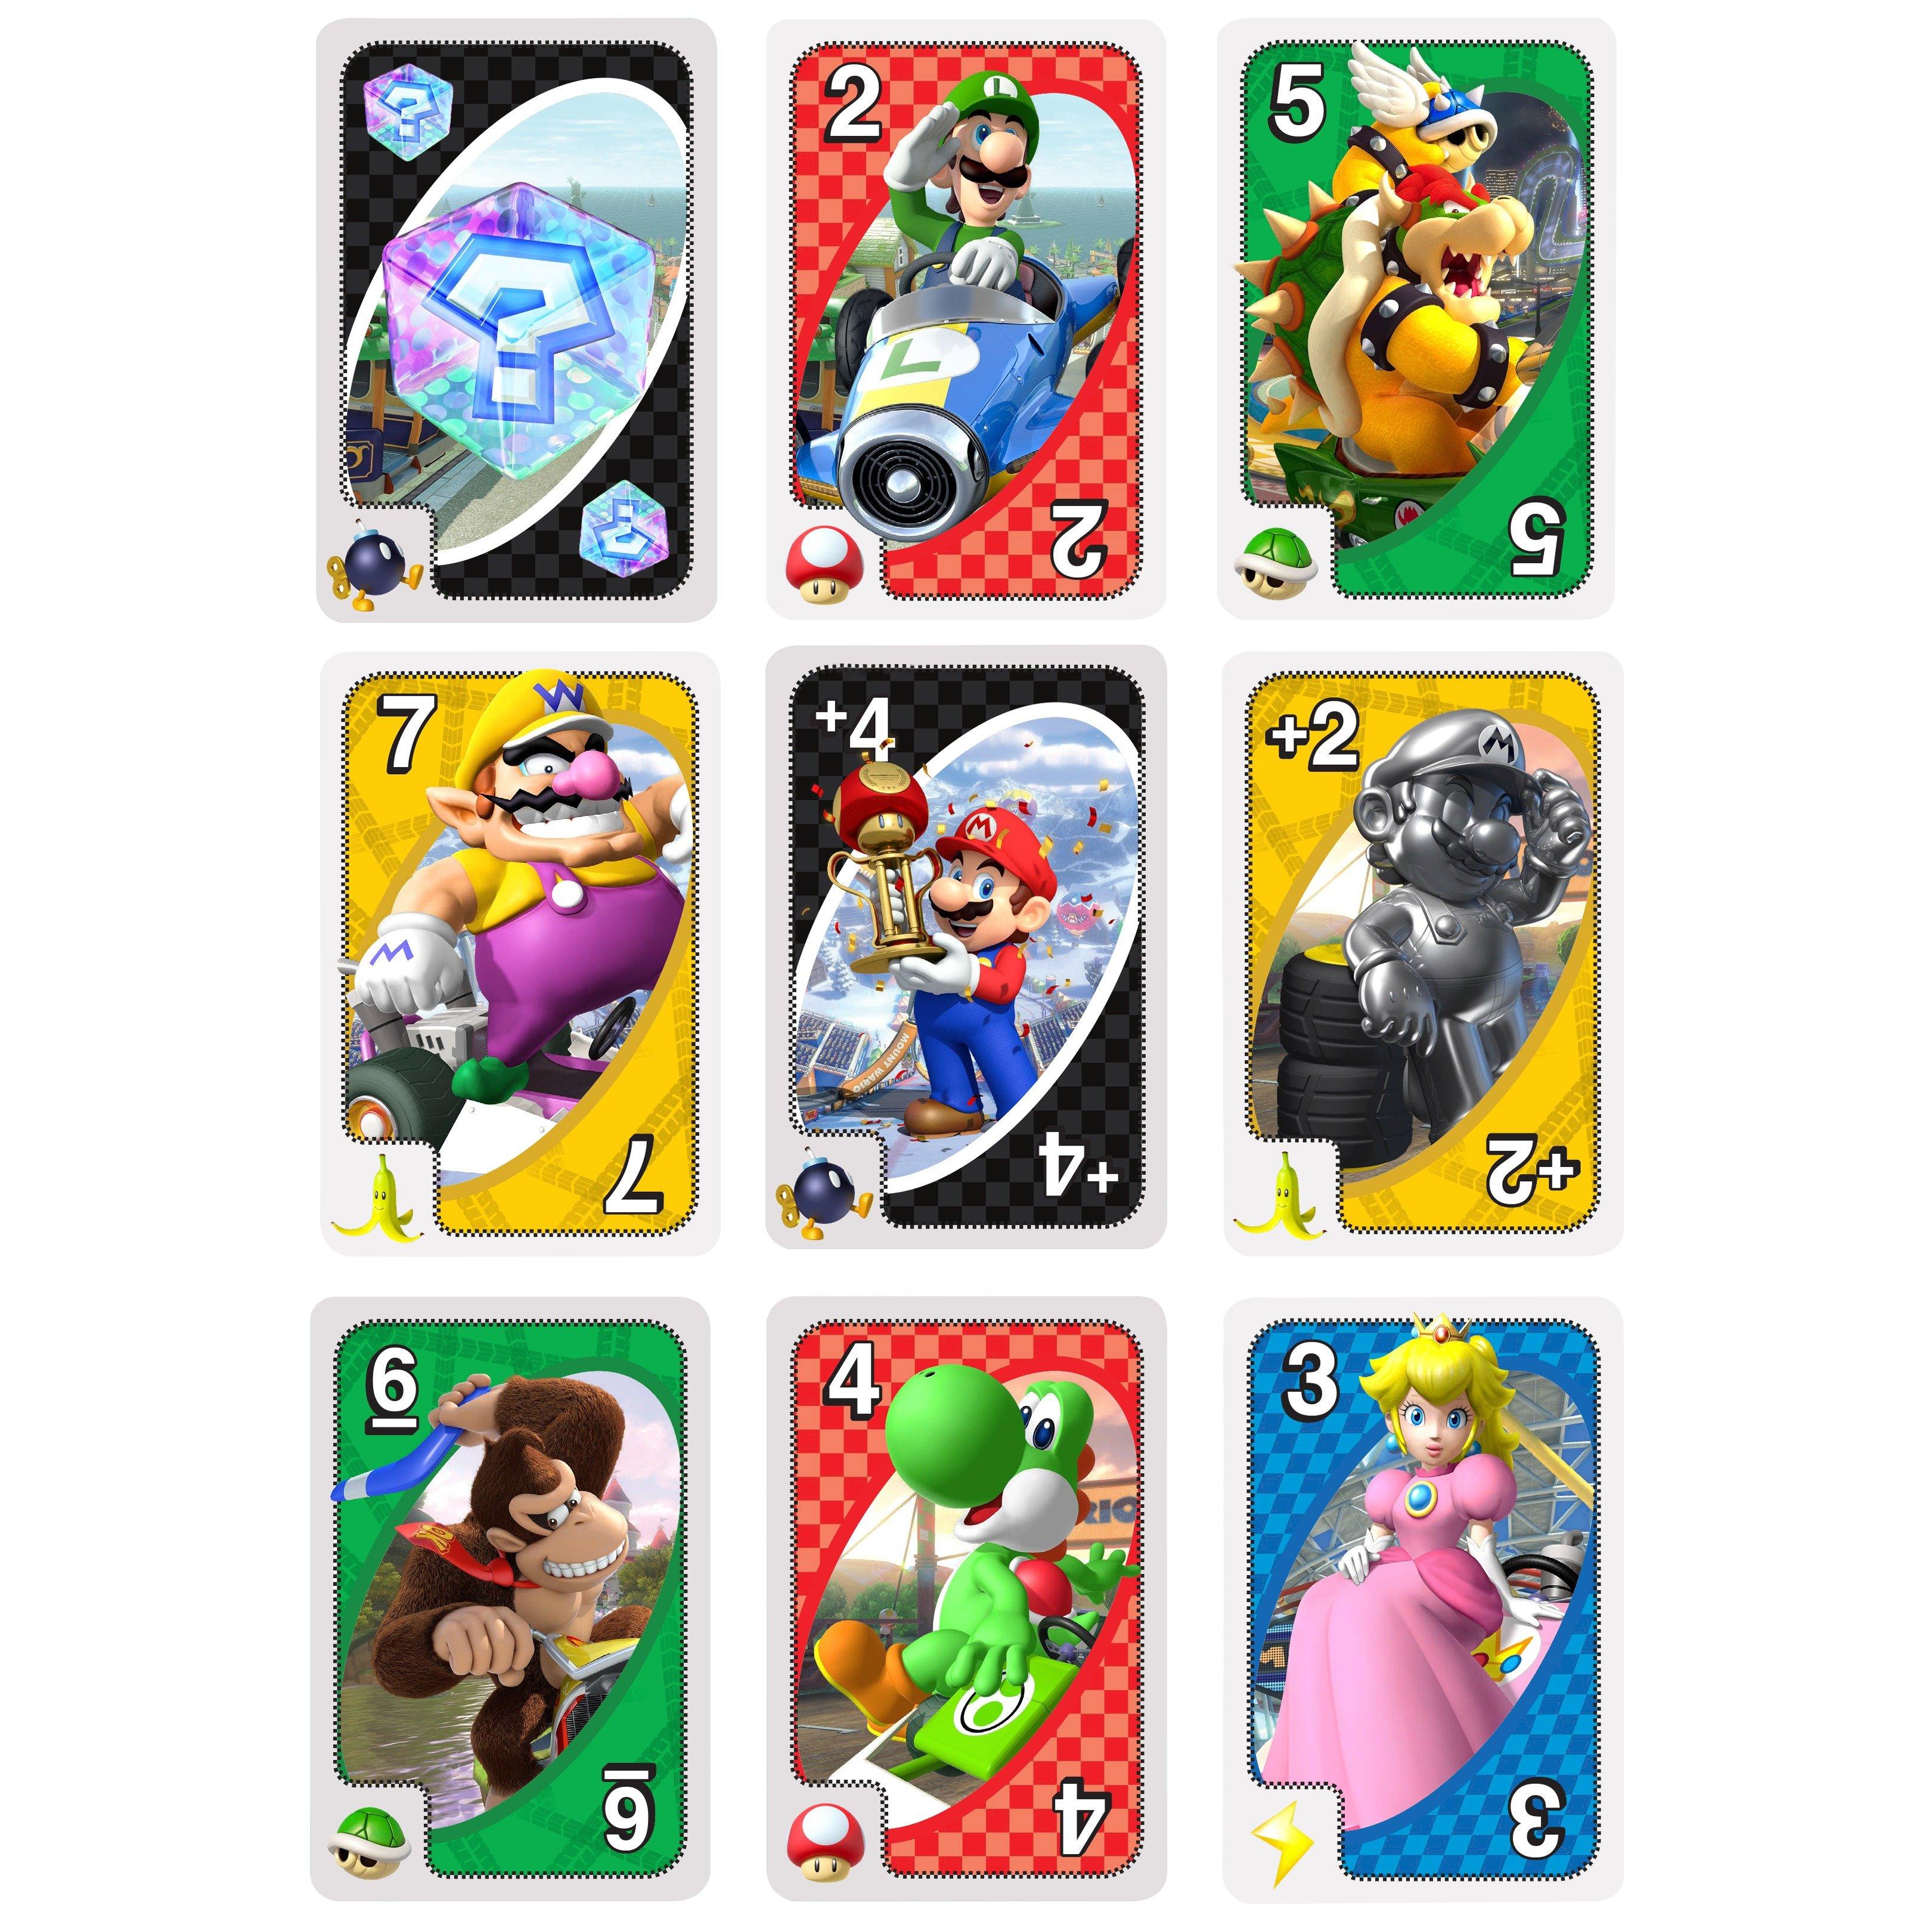 Beware of bananas and Reverse Cards. UNO Mario Kart is available now.